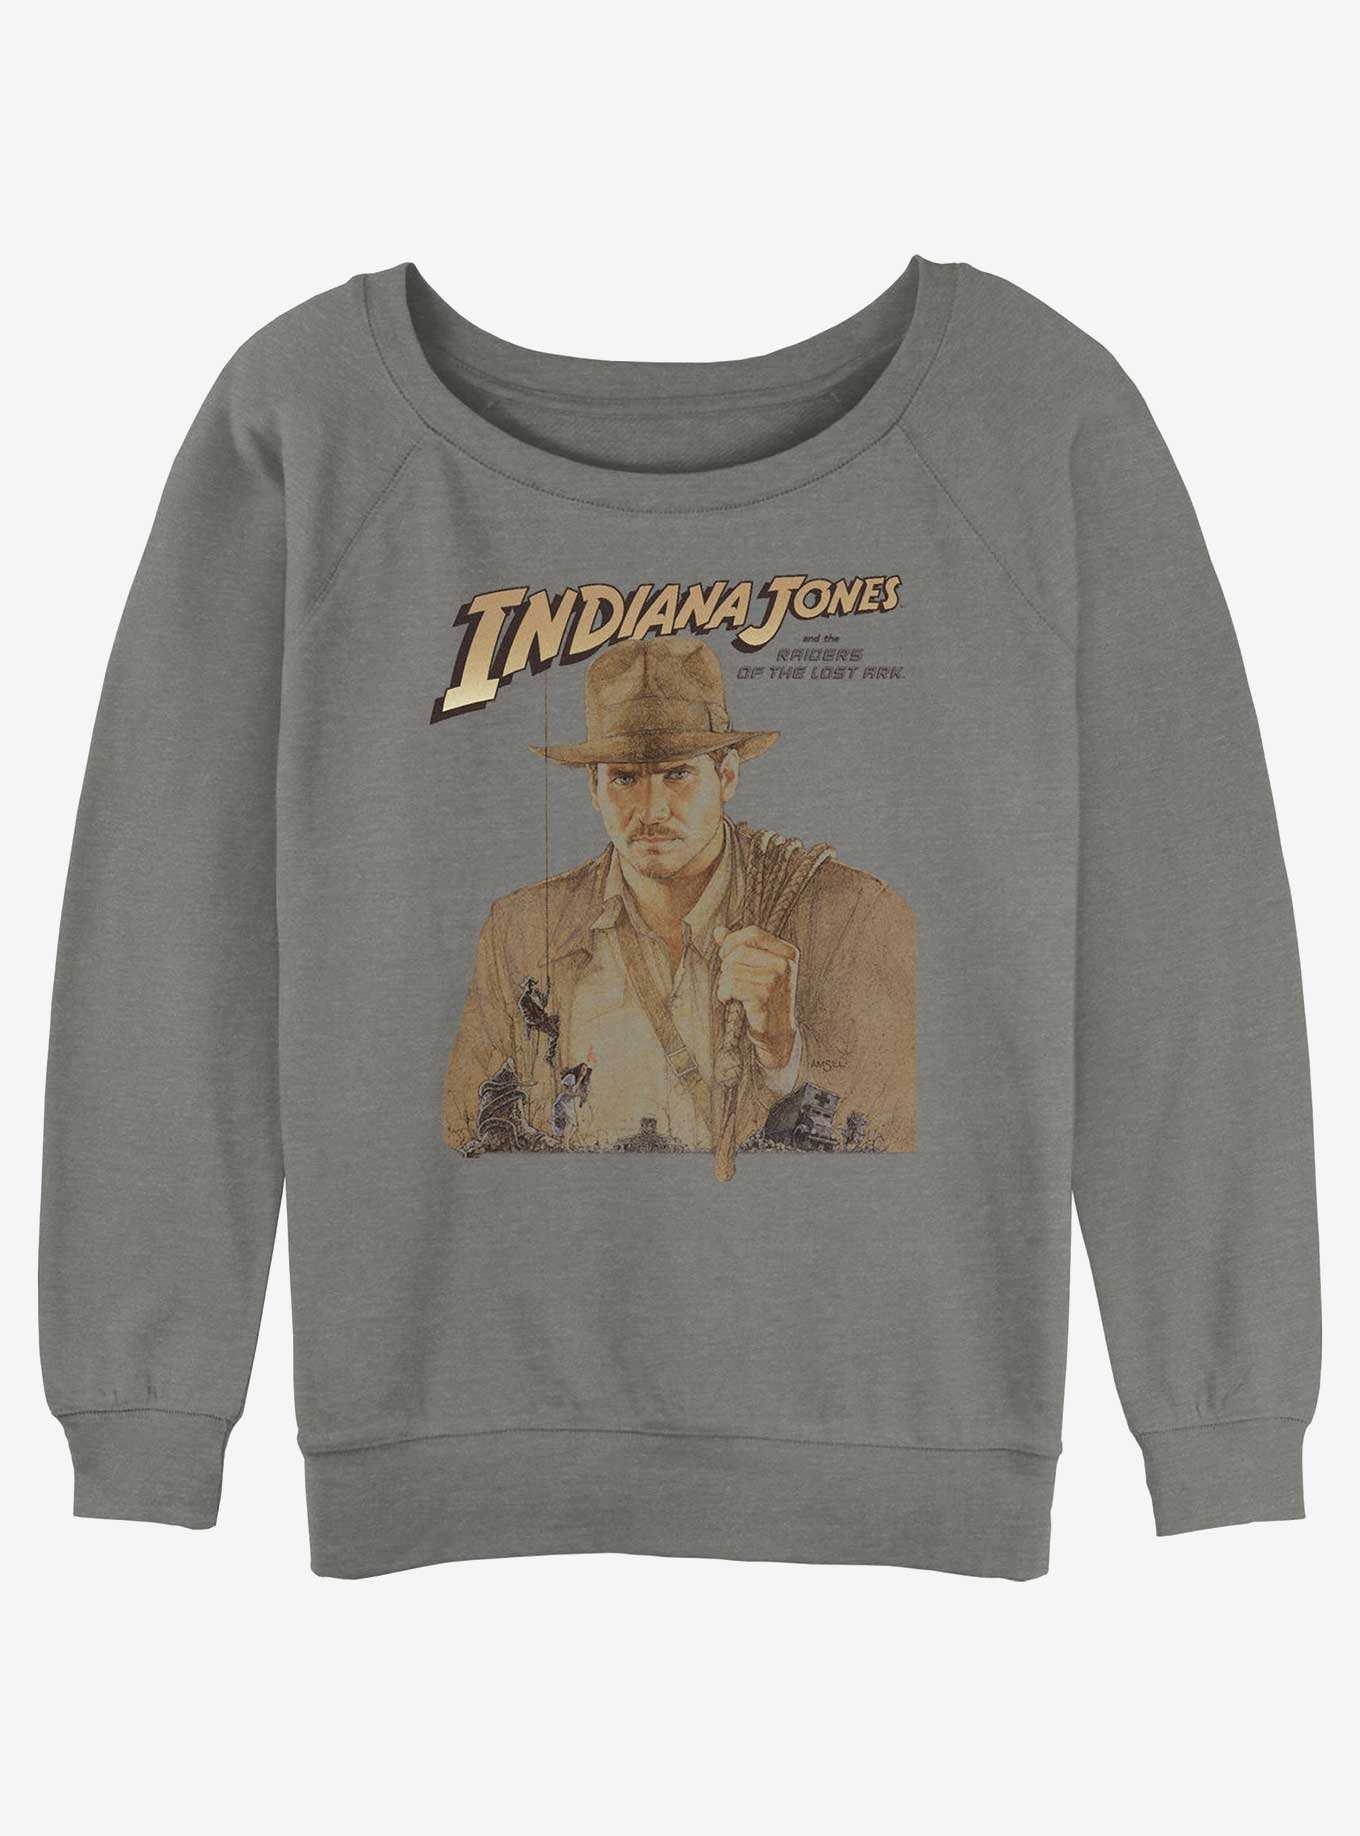 Indiana Jones and the Raiders of the Lost Ark Womens Slouchy Sweatshirt, , hi-res